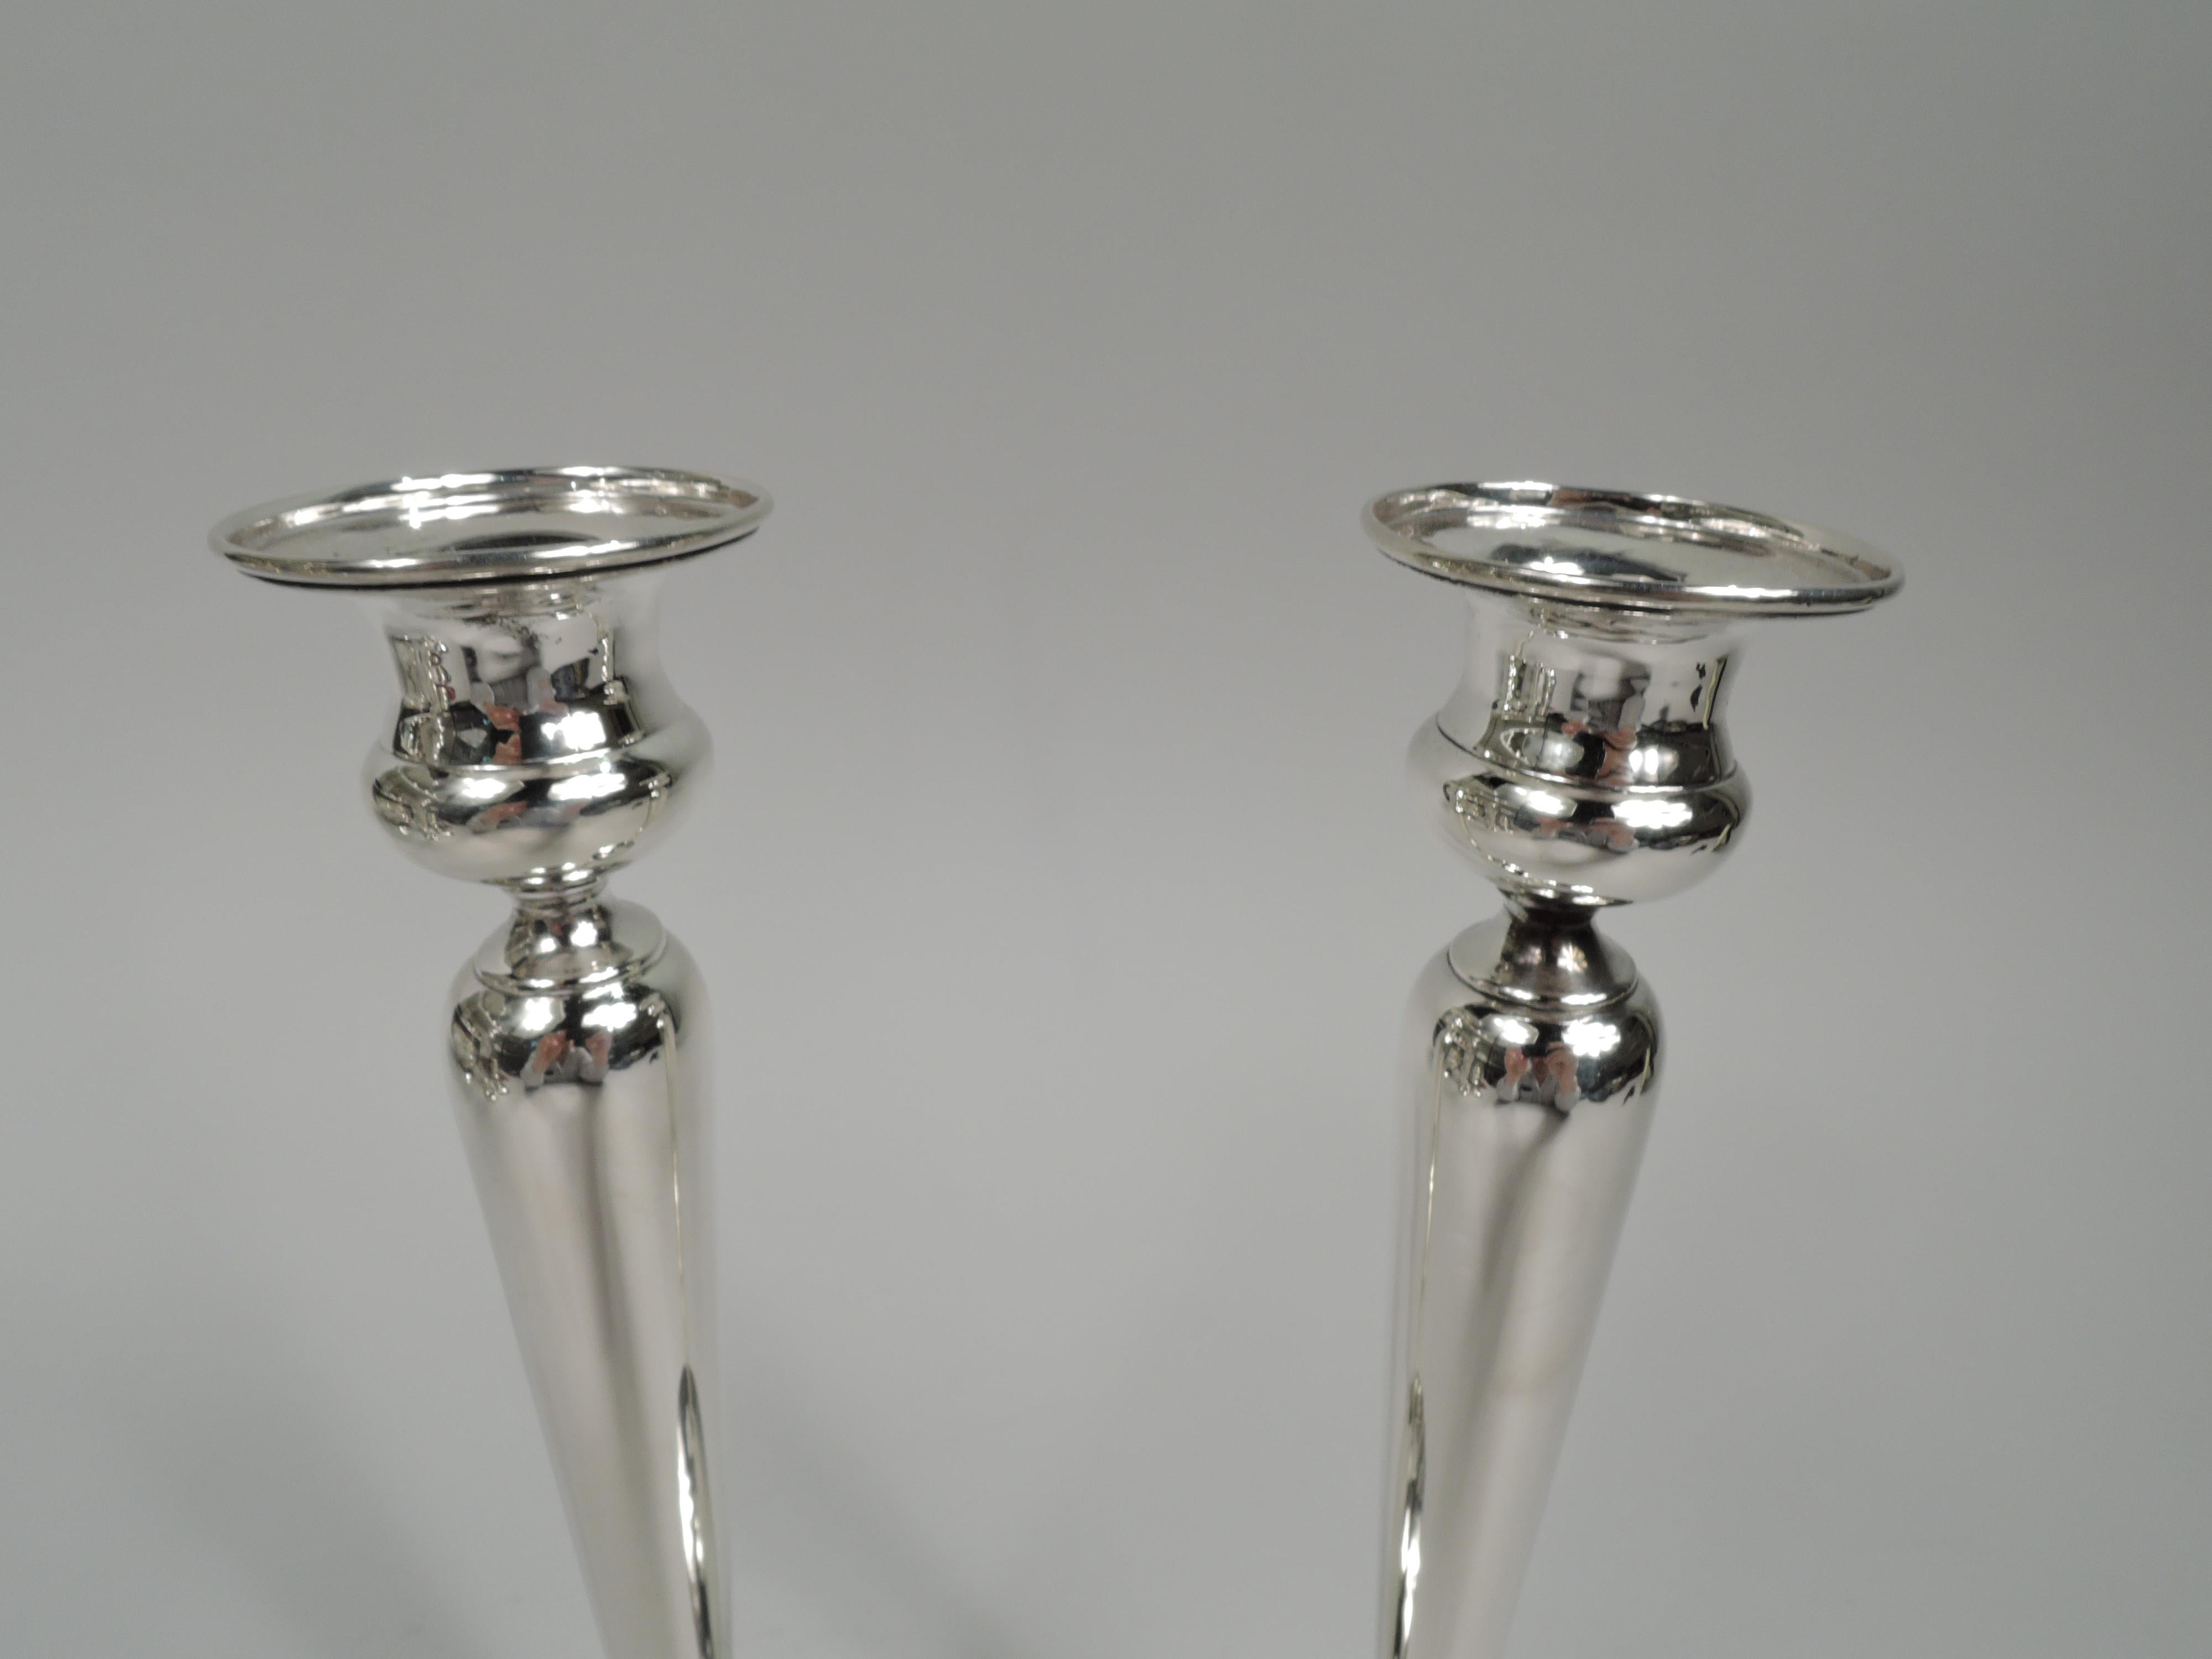 Pair of elegant Edwardian Modern Georgian sterling silver candlesticks. Made by La Pierre Mfg. Co. (part of International) in Newark, ca 1920. Each: Bellied socket on tapering columnar shaft on round and raised foot. Fully marked including maker’s